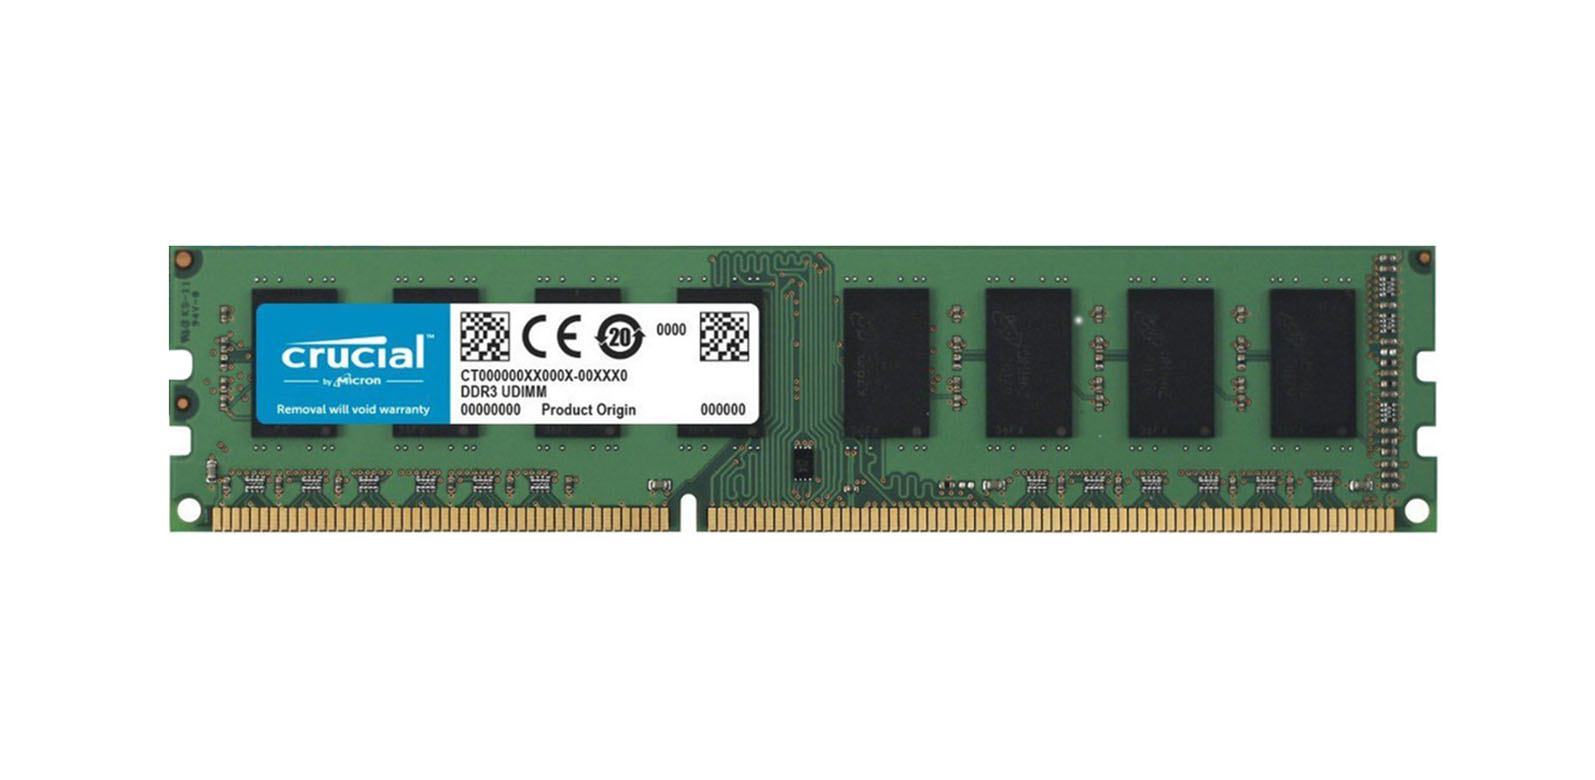 Crucial CT5676860 8GB DDR3-1600MHz PC3-12800 ECC Registered CL11 240-Pin DIMM 1.35V Low Voltage Dual Rank Very Low Profile (VLP) Memory Module upgrade for ASUS Z9PE-D8 WS